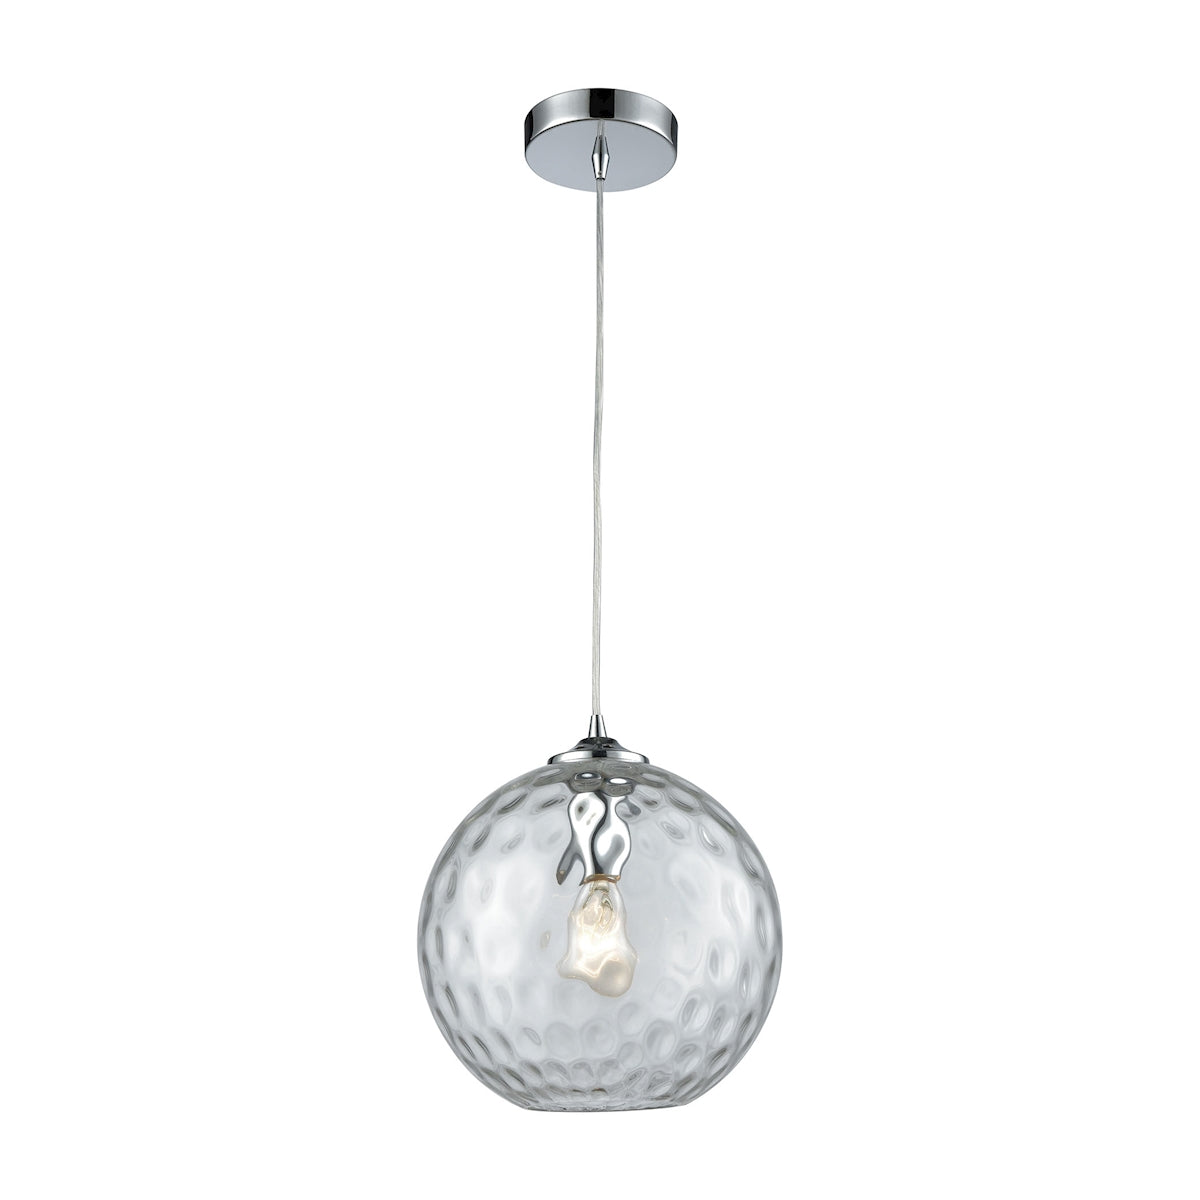 ELK Lighting 31380/1CLR Watersphere 1-Light Mini Pendant in Chrome with Hammered Clear Glass